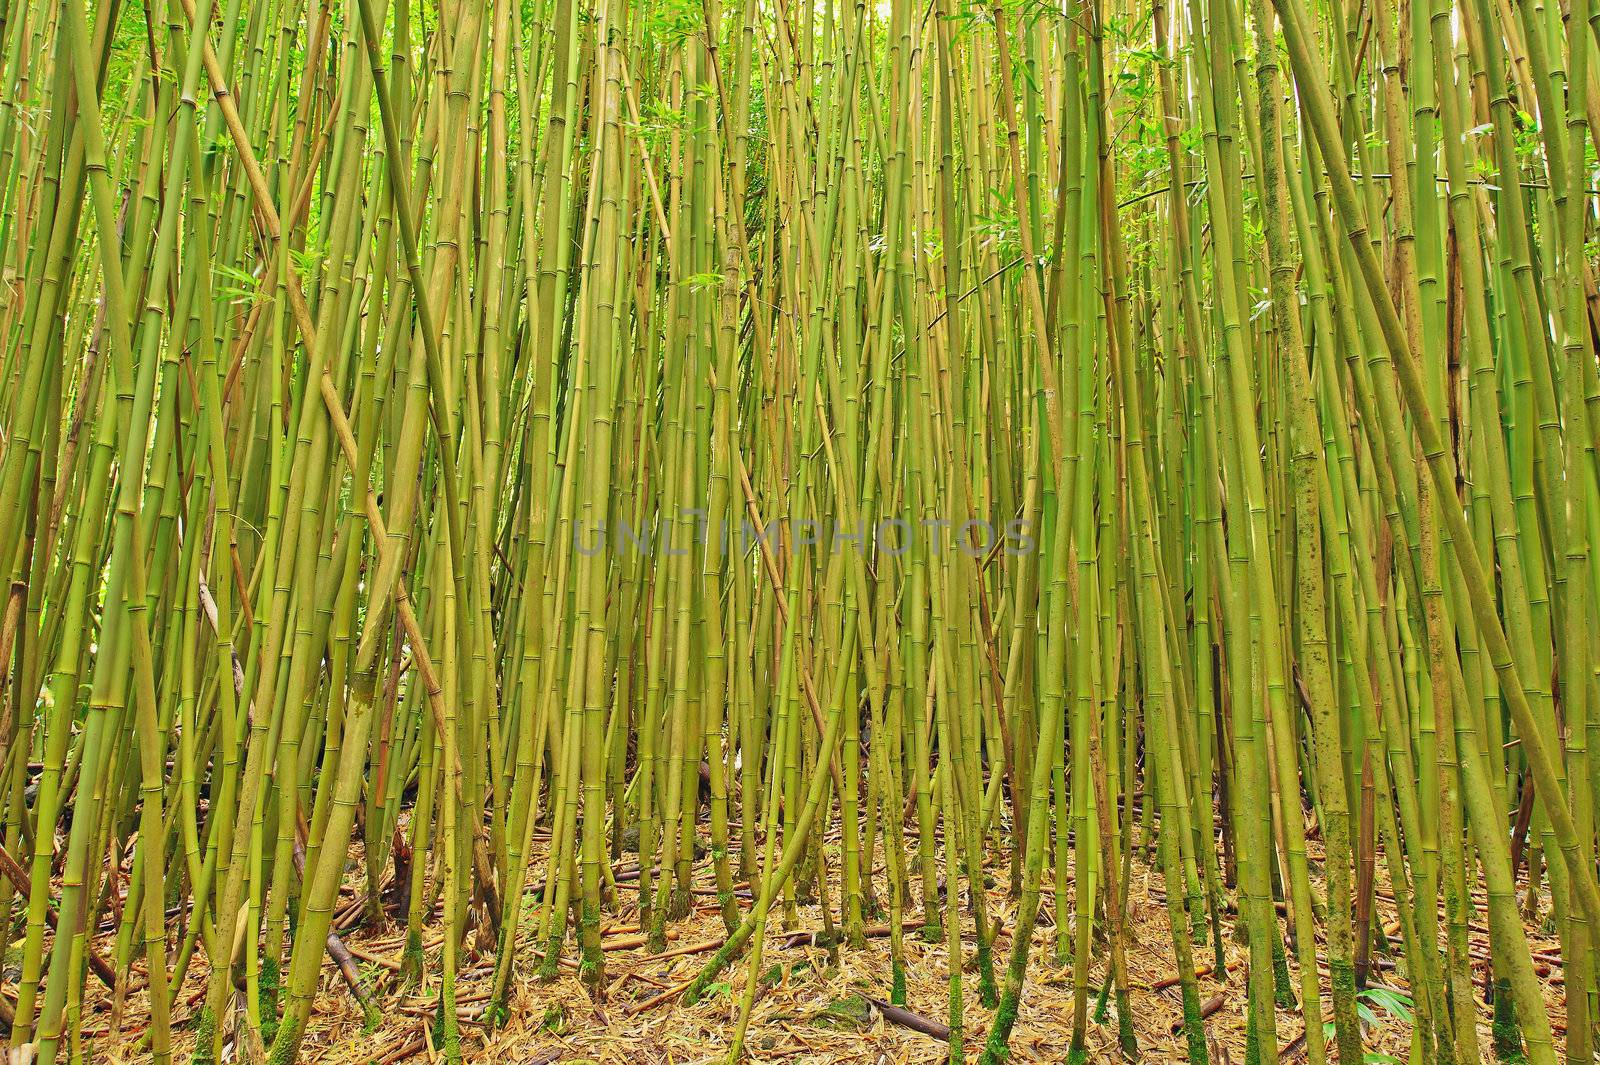 Wide angle of a Bamboo Forest in Hana, Maui by Marcus